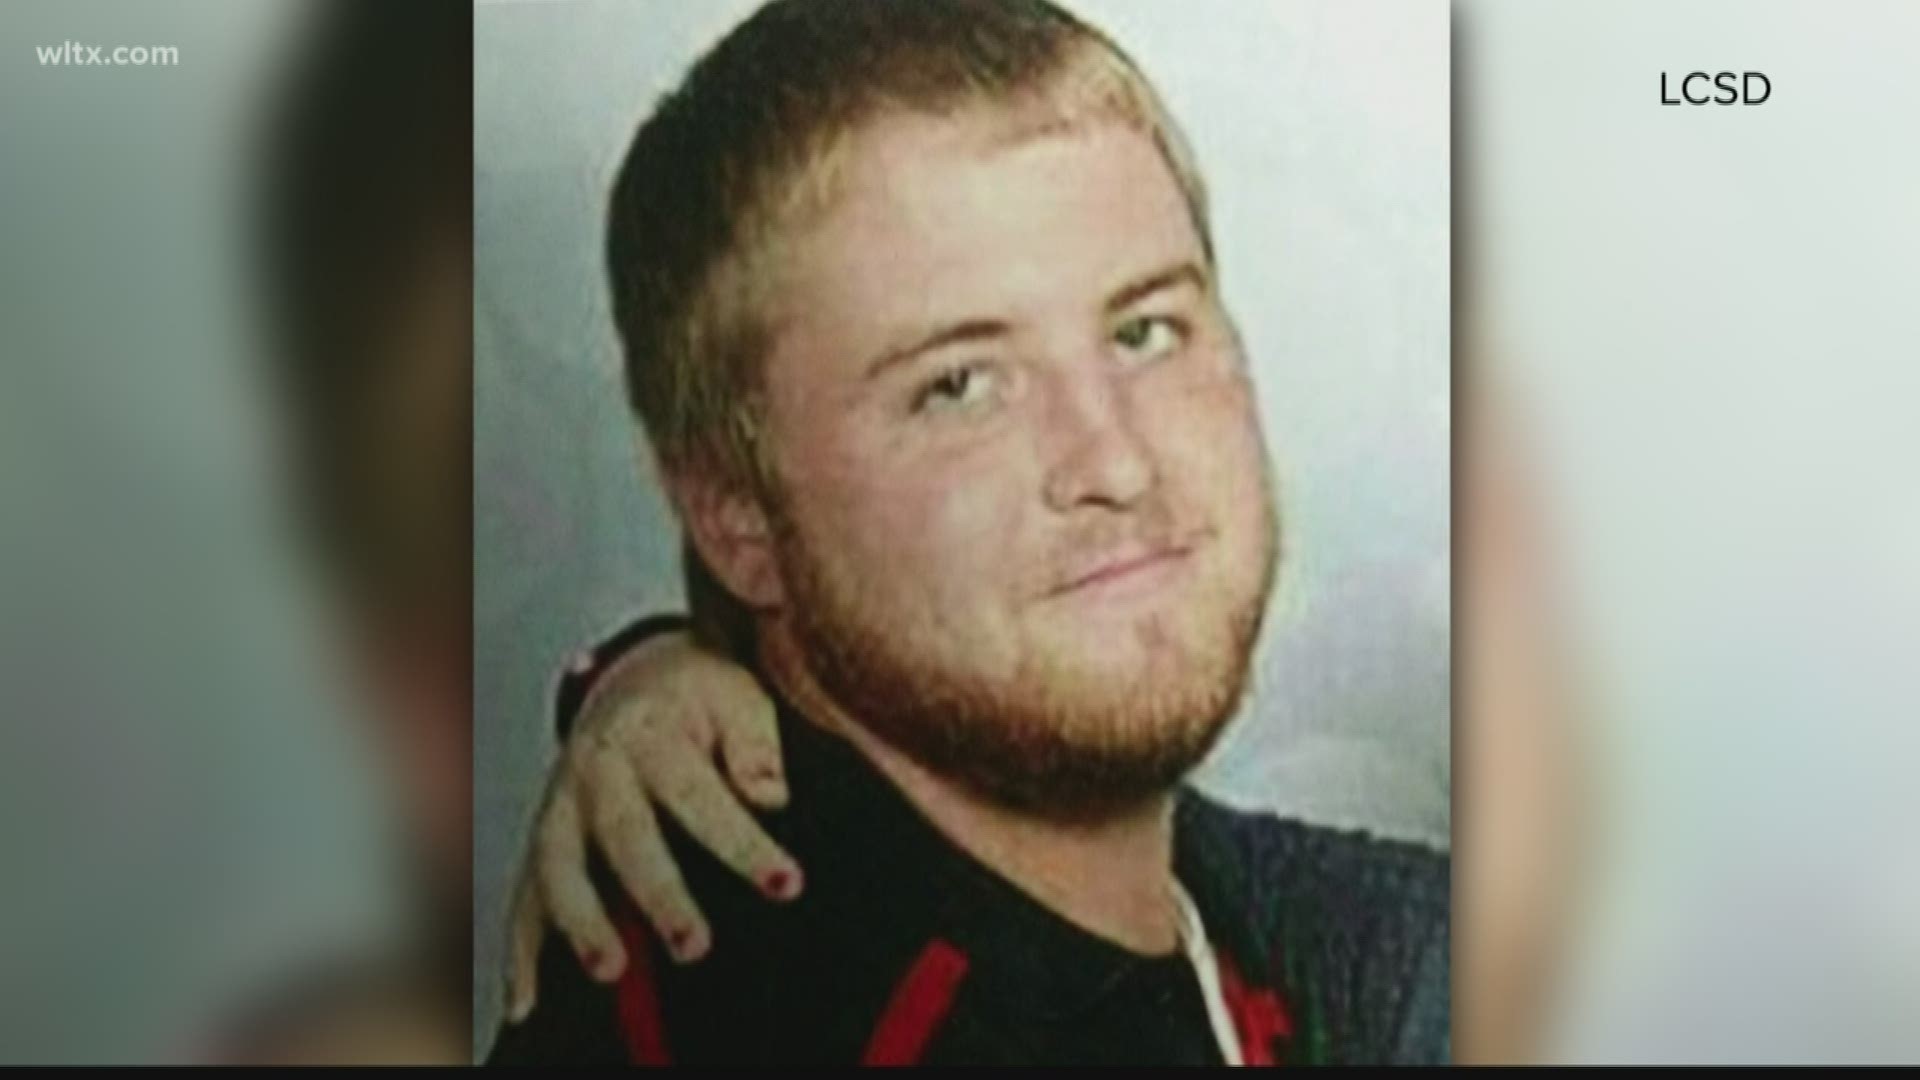 Taylor Johnson, 22, was found in a wooded area in Batesburg-Leesville on February 15th.